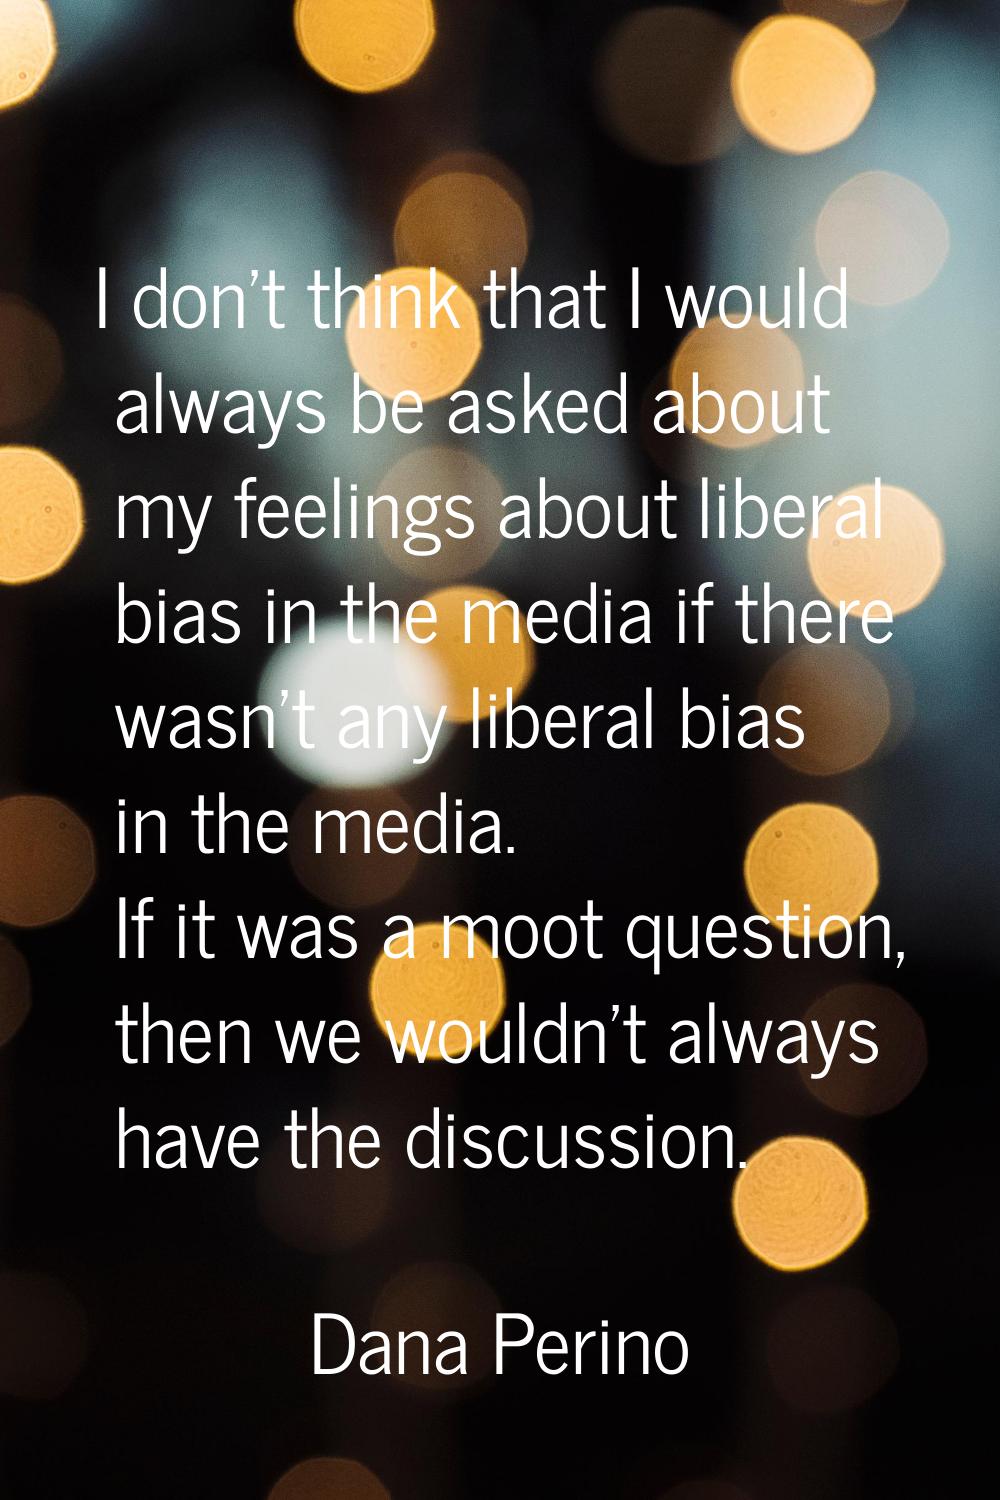 I don't think that I would always be asked about my feelings about liberal bias in the media if the